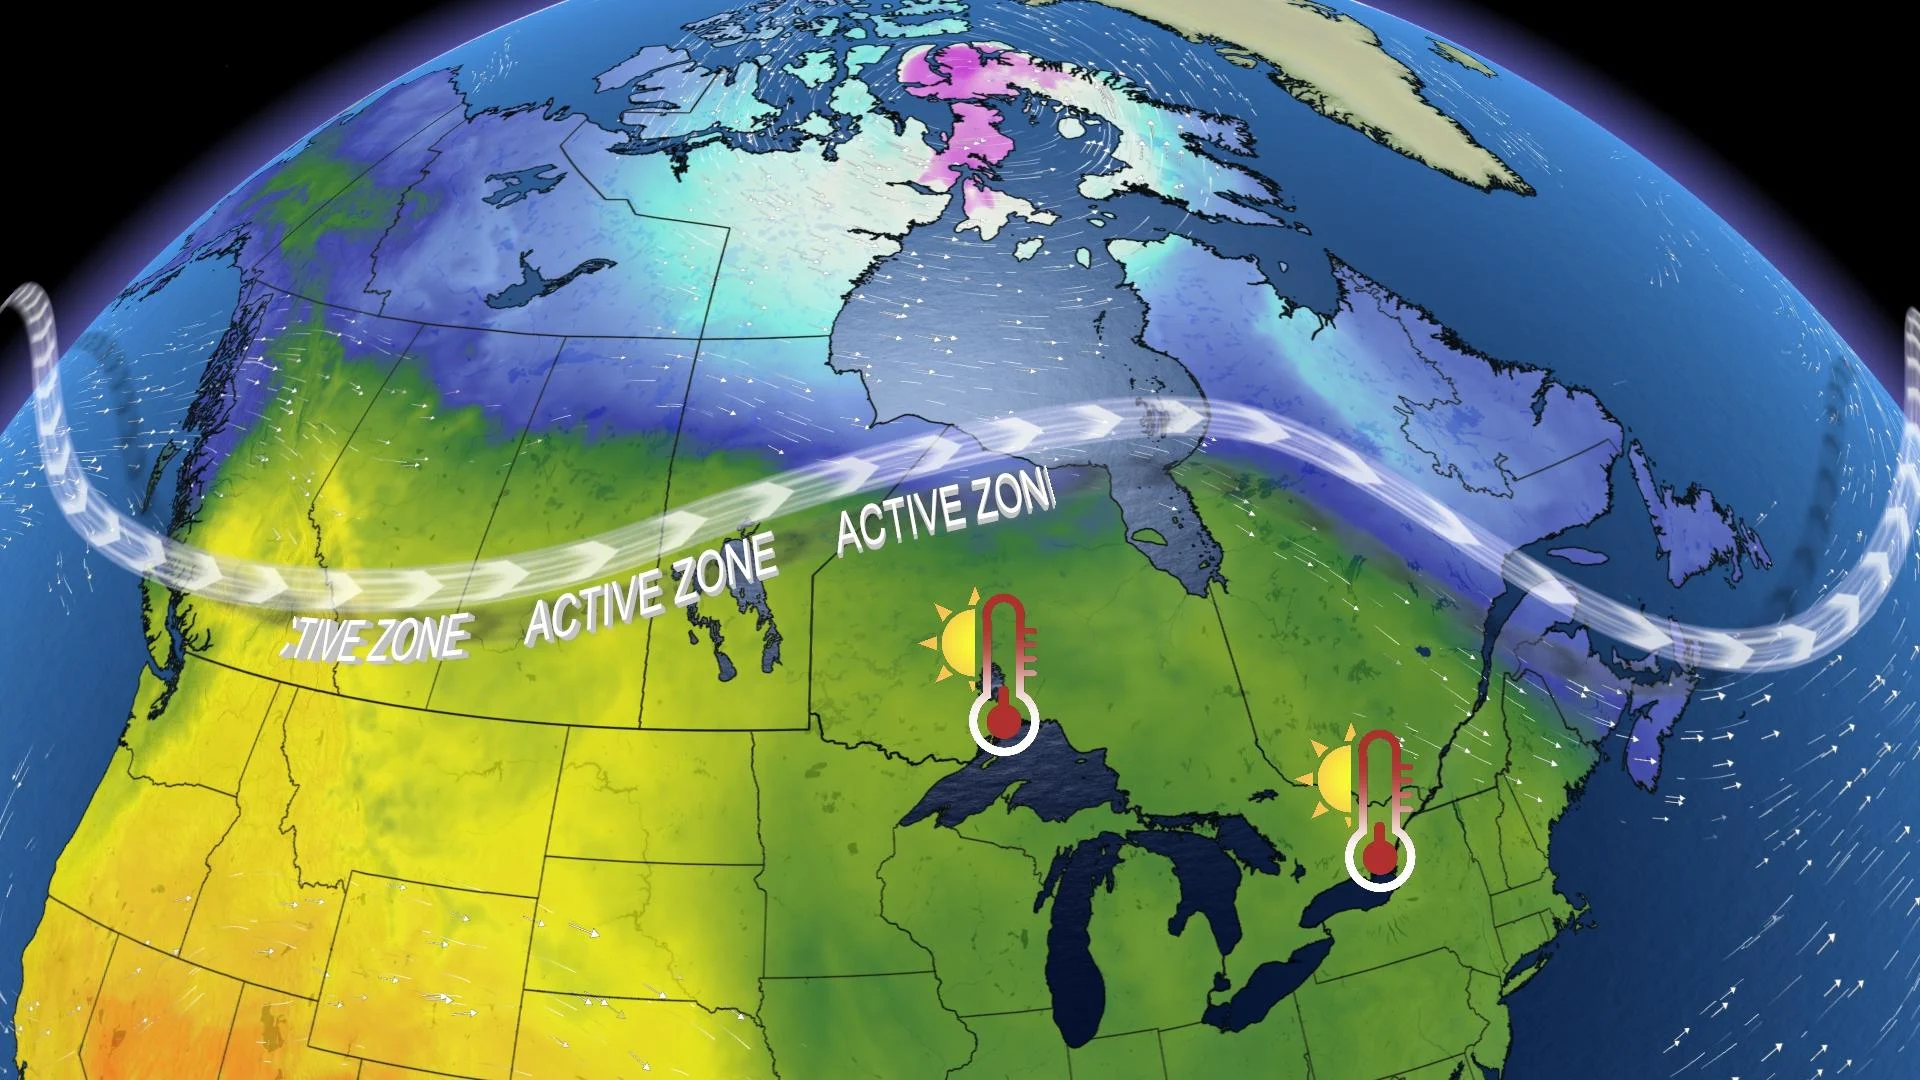 Sputtering spring finally surges back to life across Canada